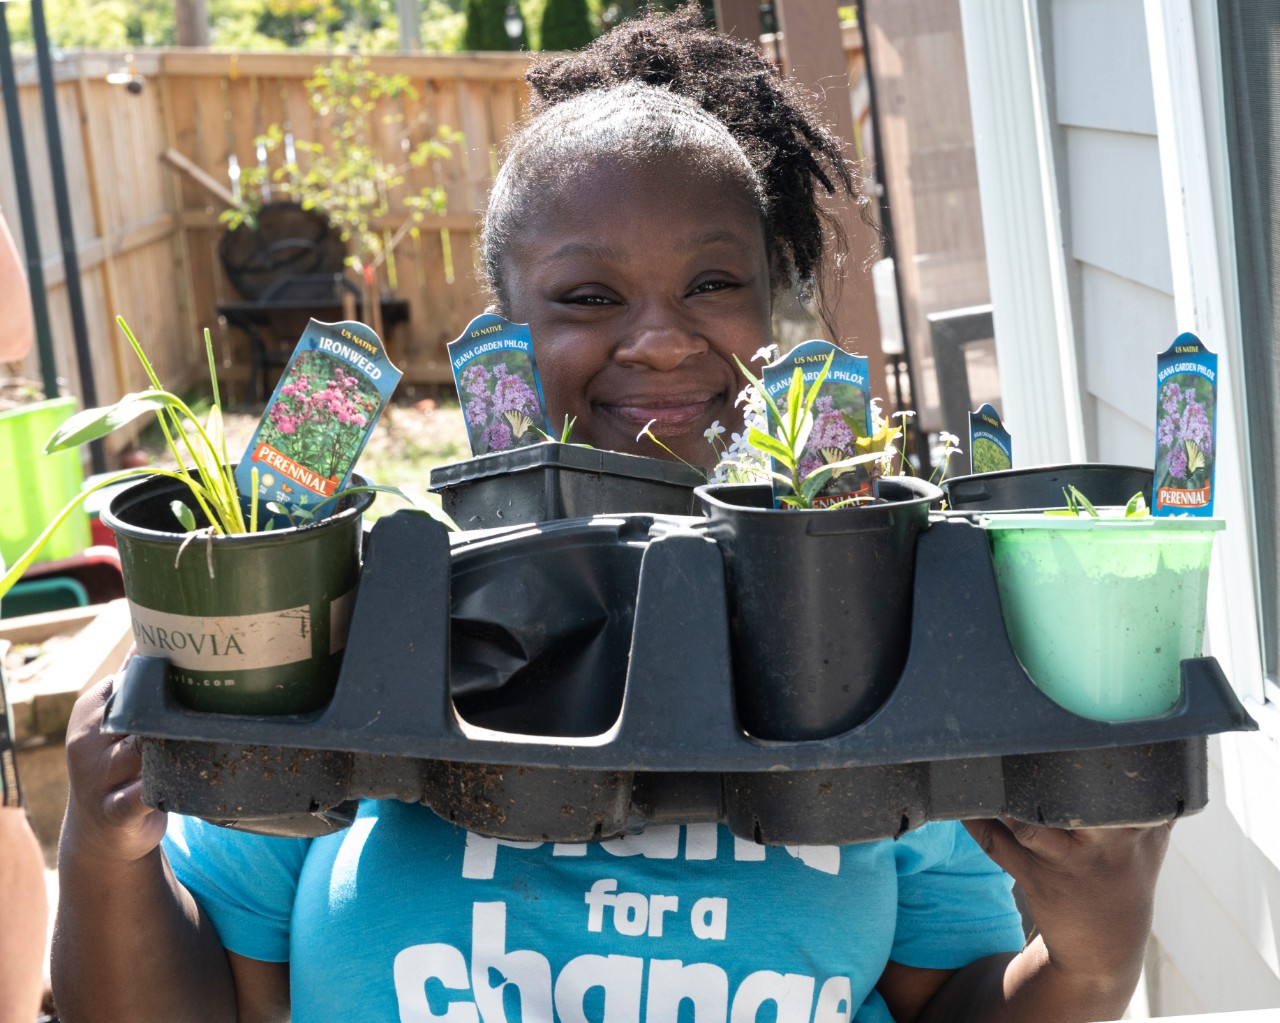 a young Black woman smiling very big, standing outside on a sunny day, and wearing a blue t-shirt that says “Plant for a Change.” She is holding up a tray of small potted plants just starting to sprout, with signs showing which plants or flowers they are, and smiling over the tray at the camera.